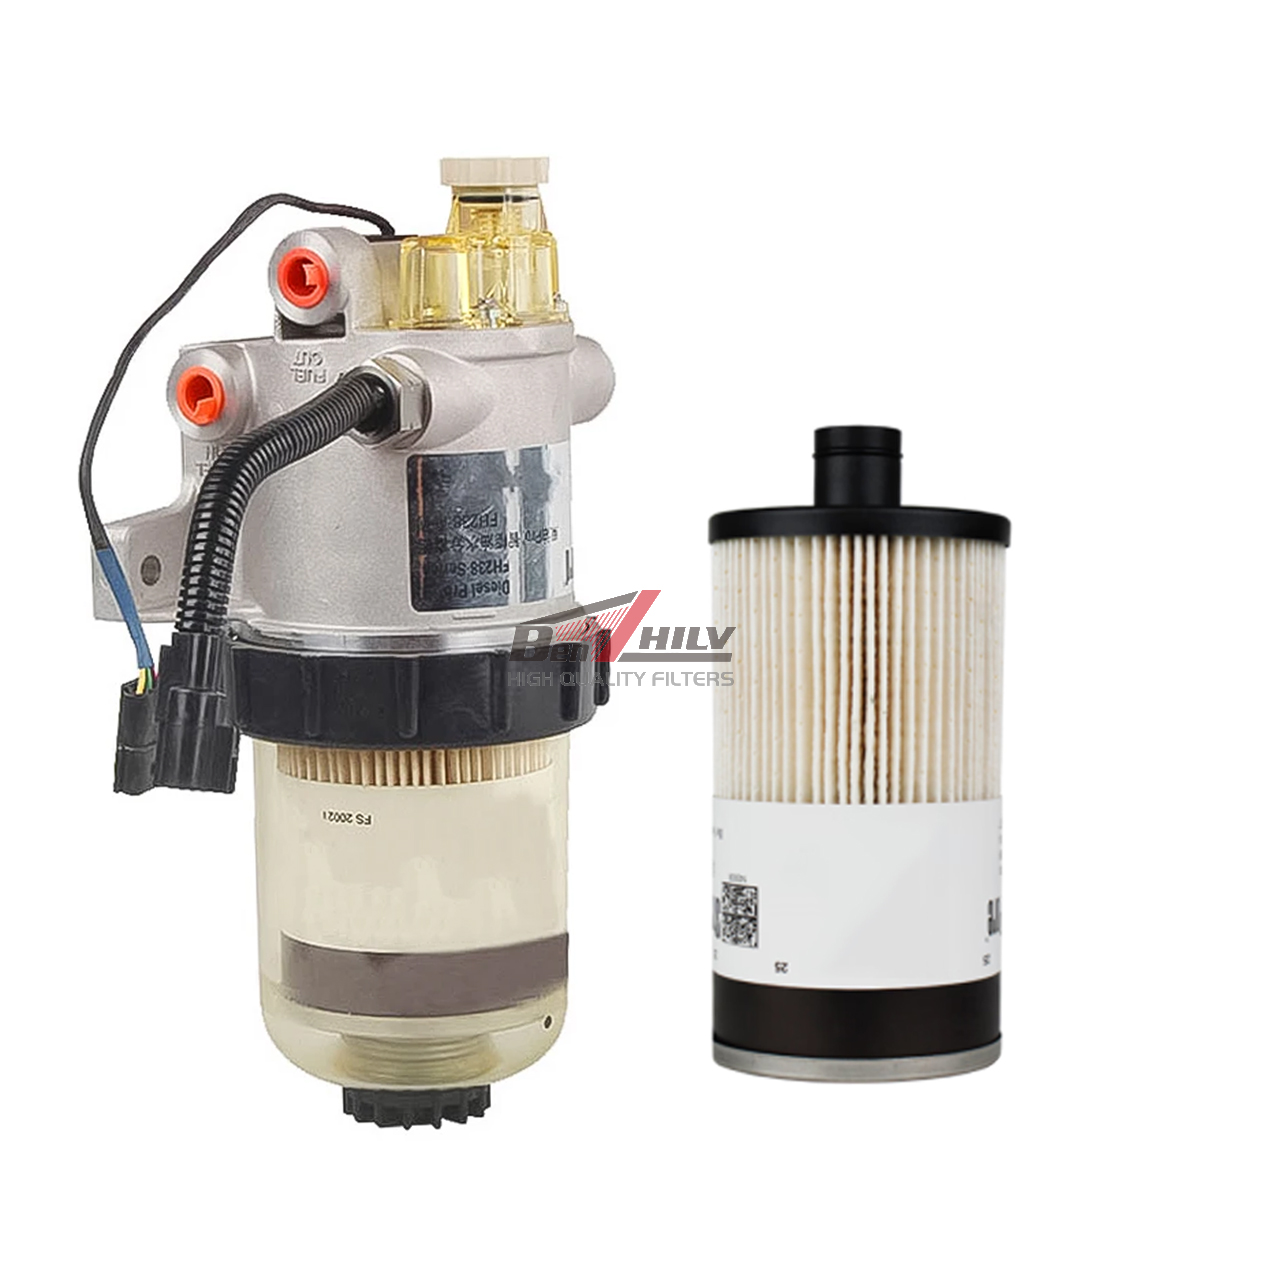 FS20019 FS20020 FS20021 53C0945 800150422 DIESEL FUEL FILTER WATER SEPARATOR Assembly Featured Image